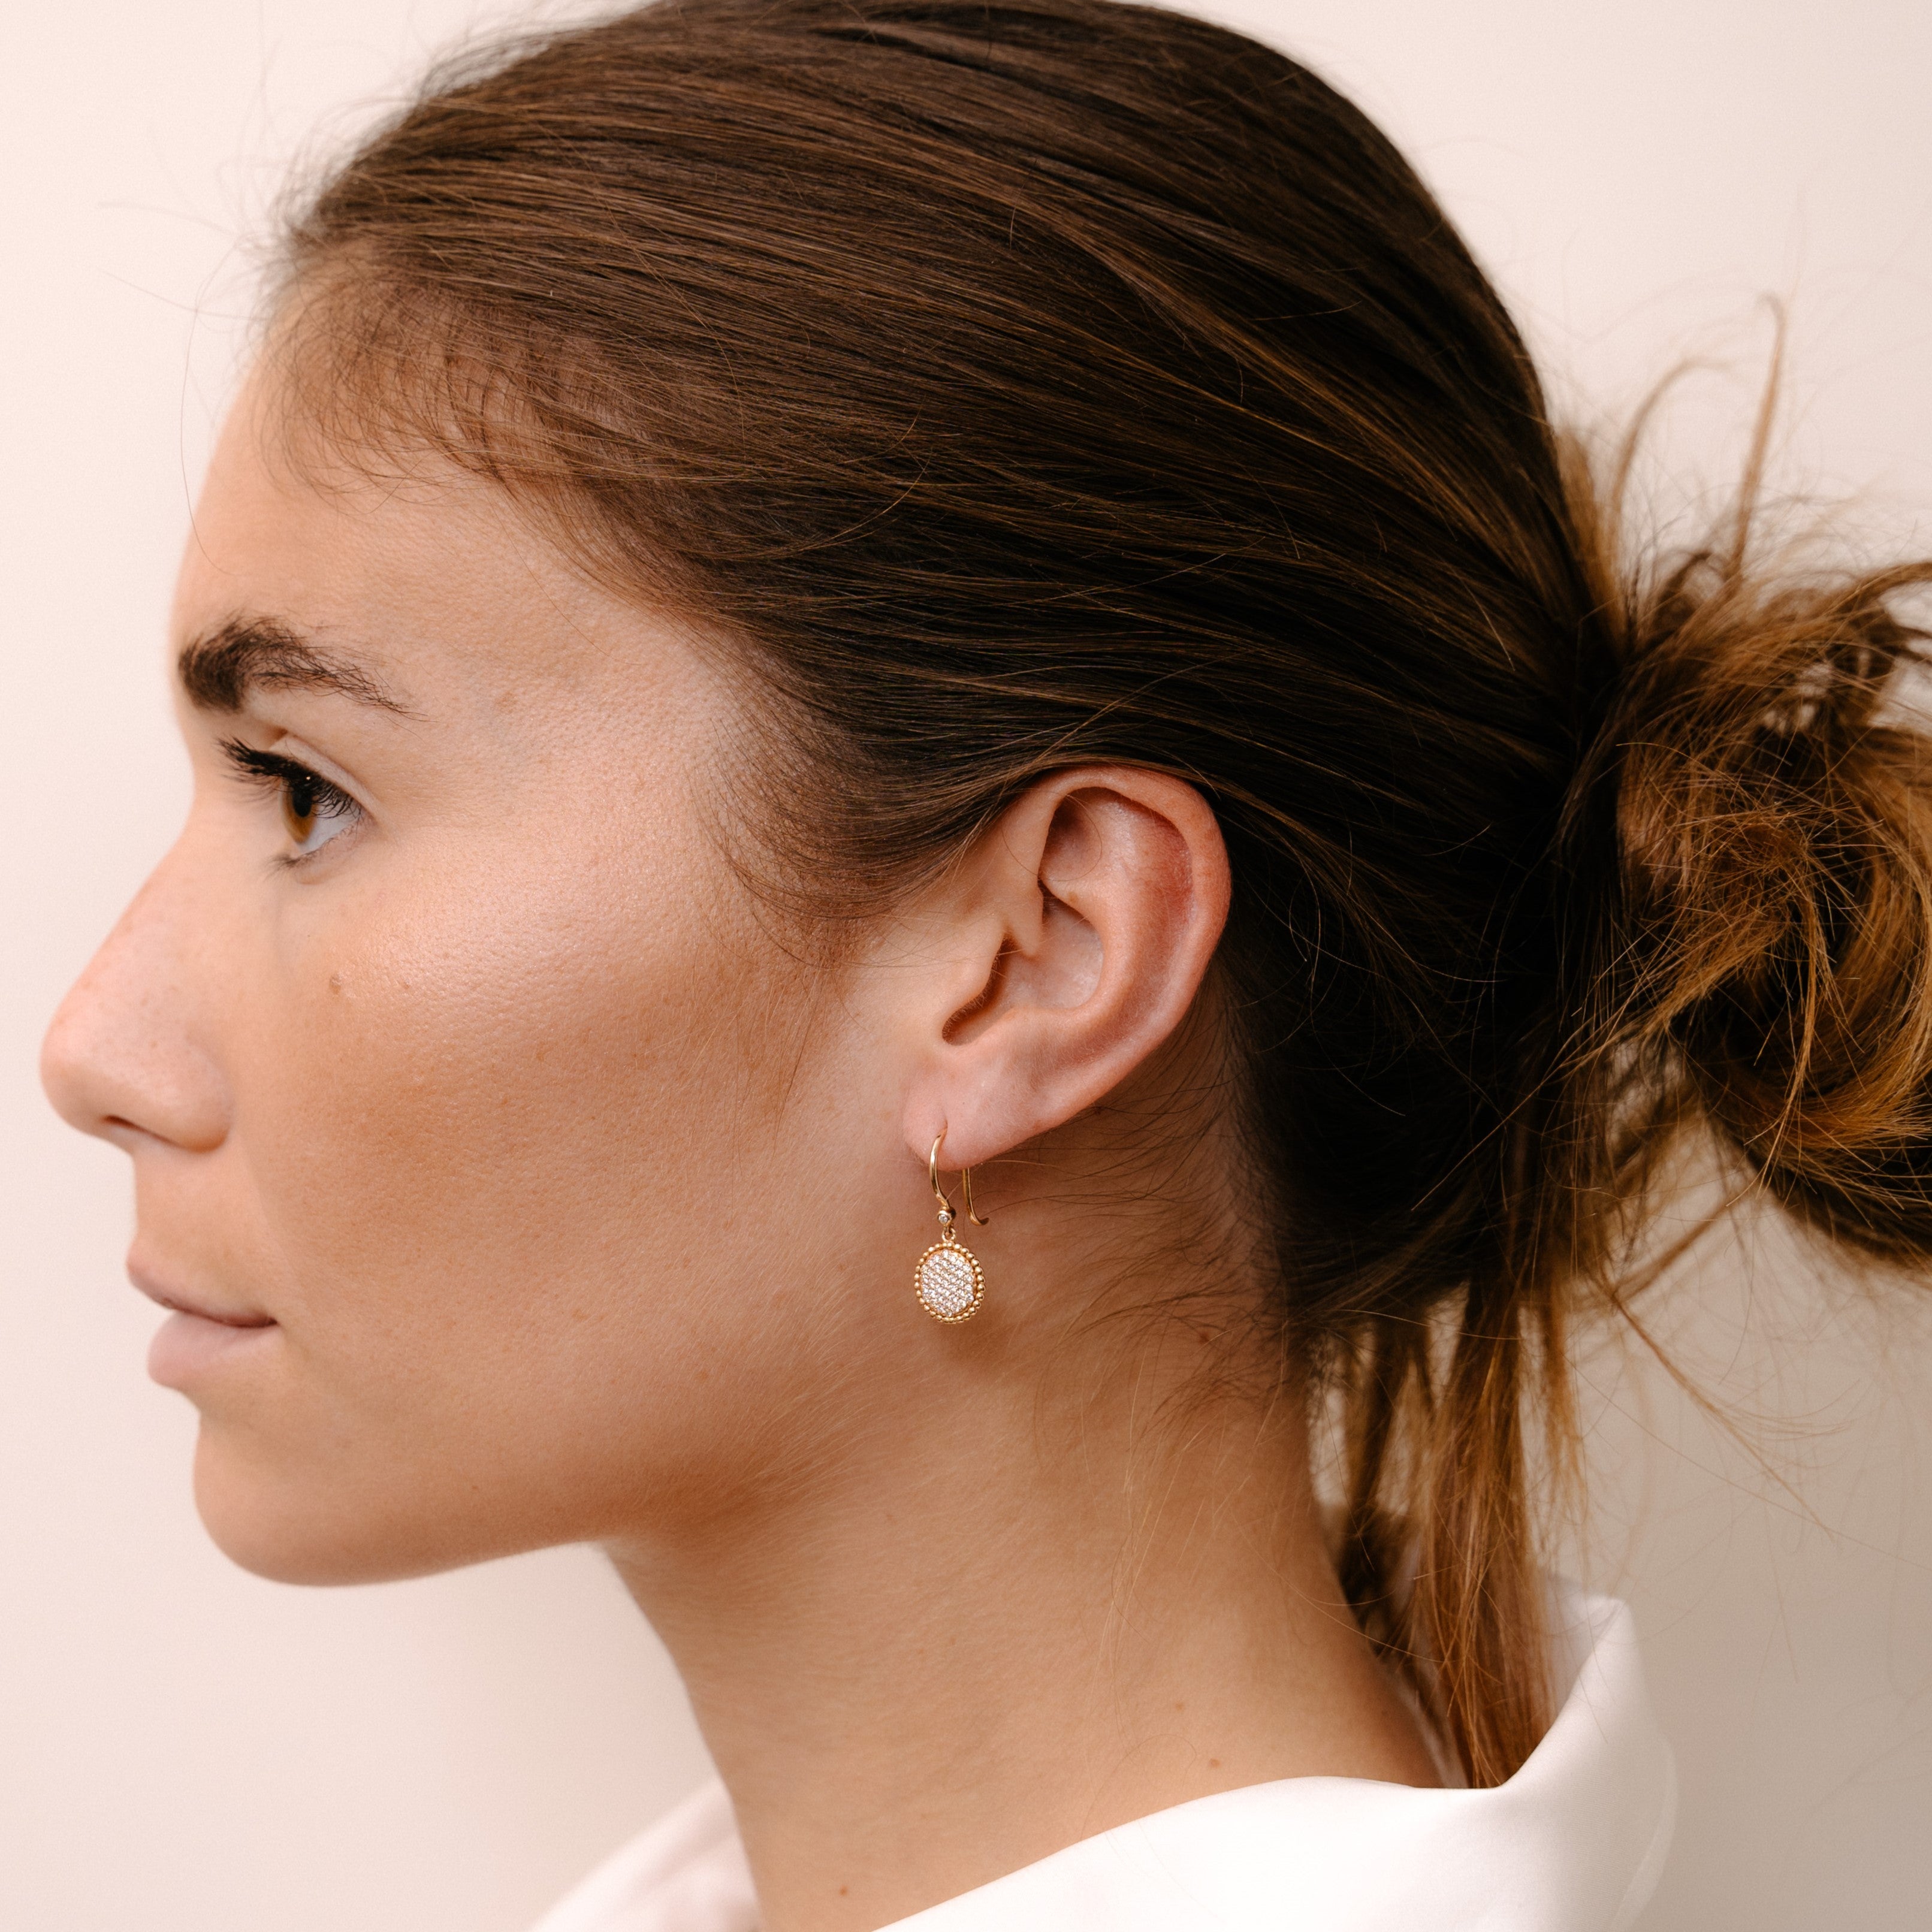 Model wearing circular earring with diamond plateau by O! Jewelry on one side